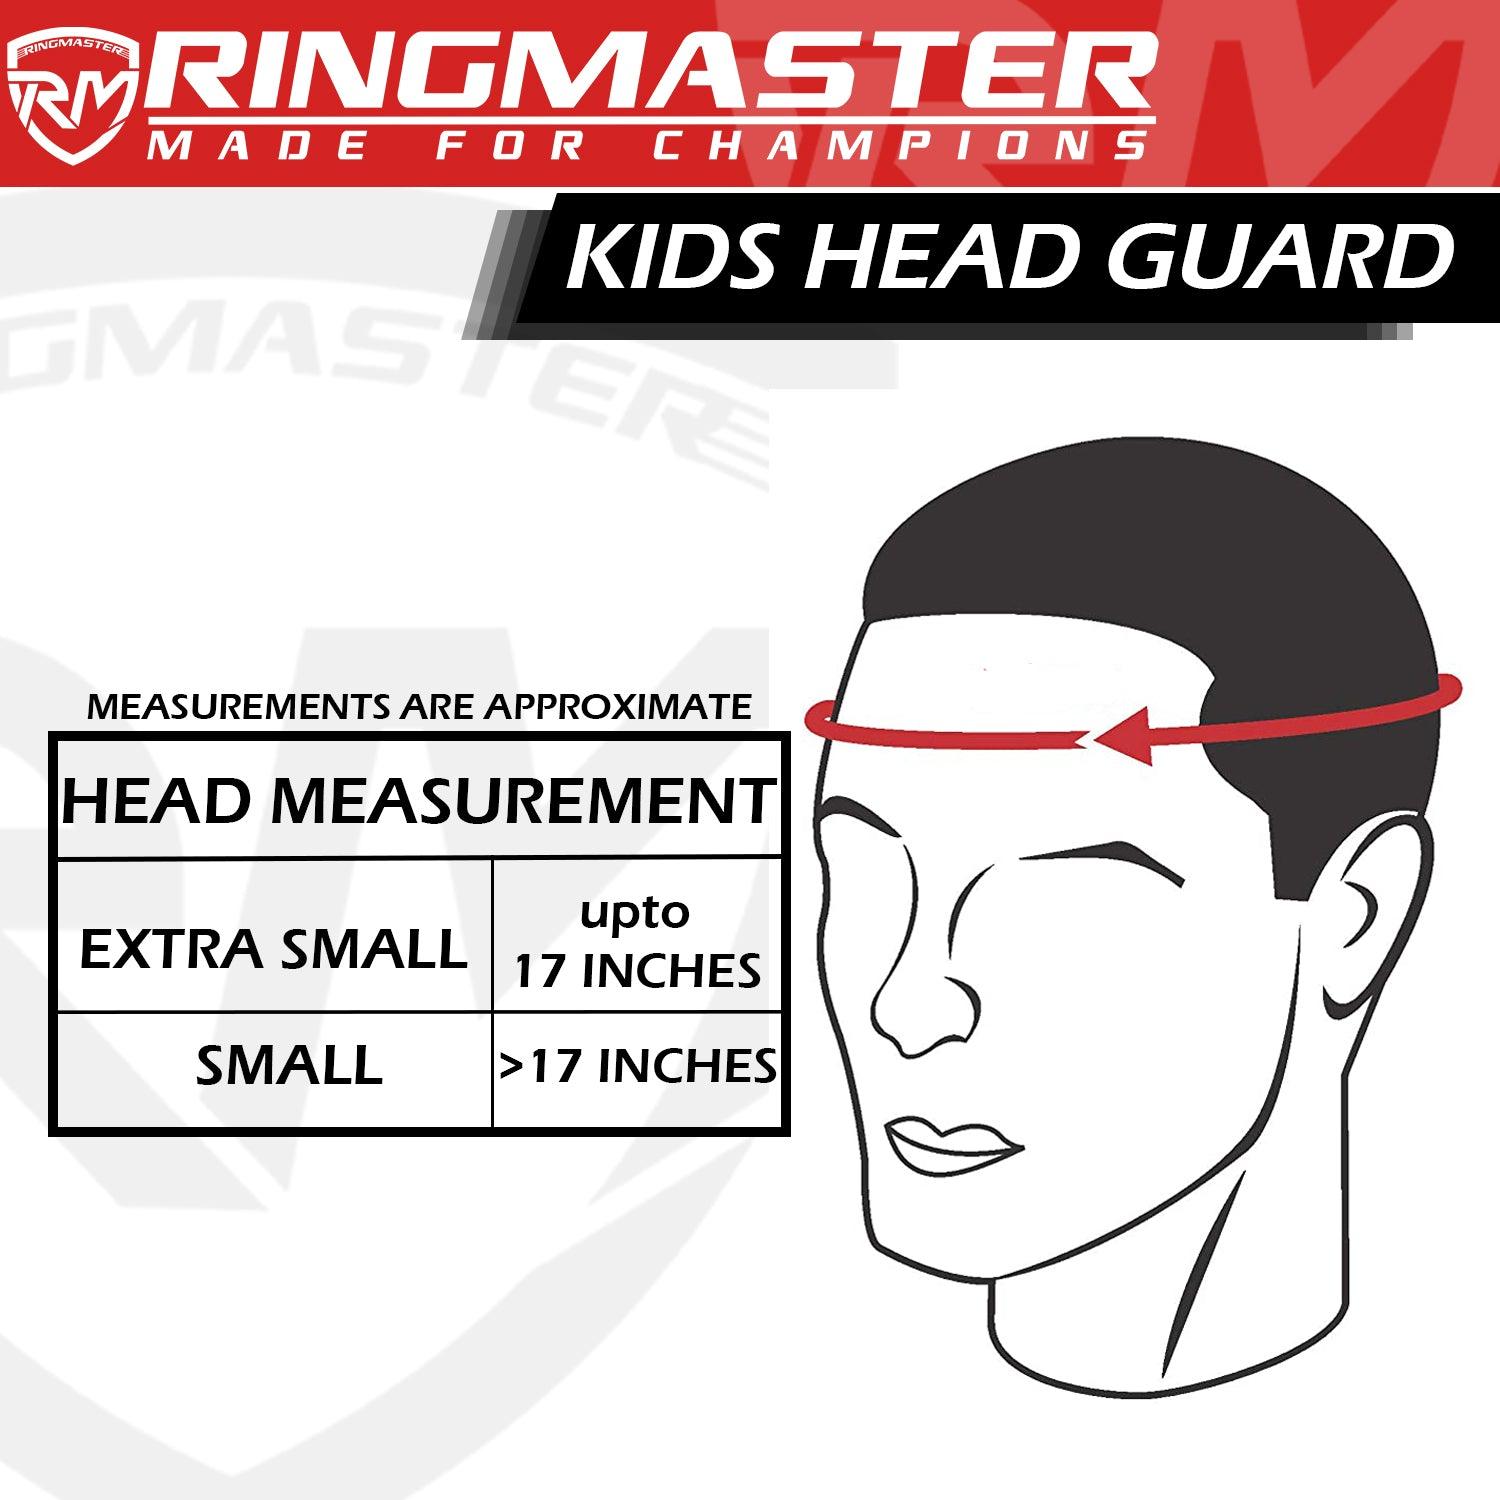 Junior Head Guard Boxing, Head Guard Red and white Kids headguards boxing, best junior boxing head guard, Kids Headguards, head guard, boxing head guard, taekwondo head guard, karate head guard, taekwondo head guard price, taekwondo white head guard, Ringmaster Sports Head guard, Ringmaster Sports Equipment, Ringmaster boxing Equipment, RingMaster Sports Kids Boxing HeadGuard Red and White image 5